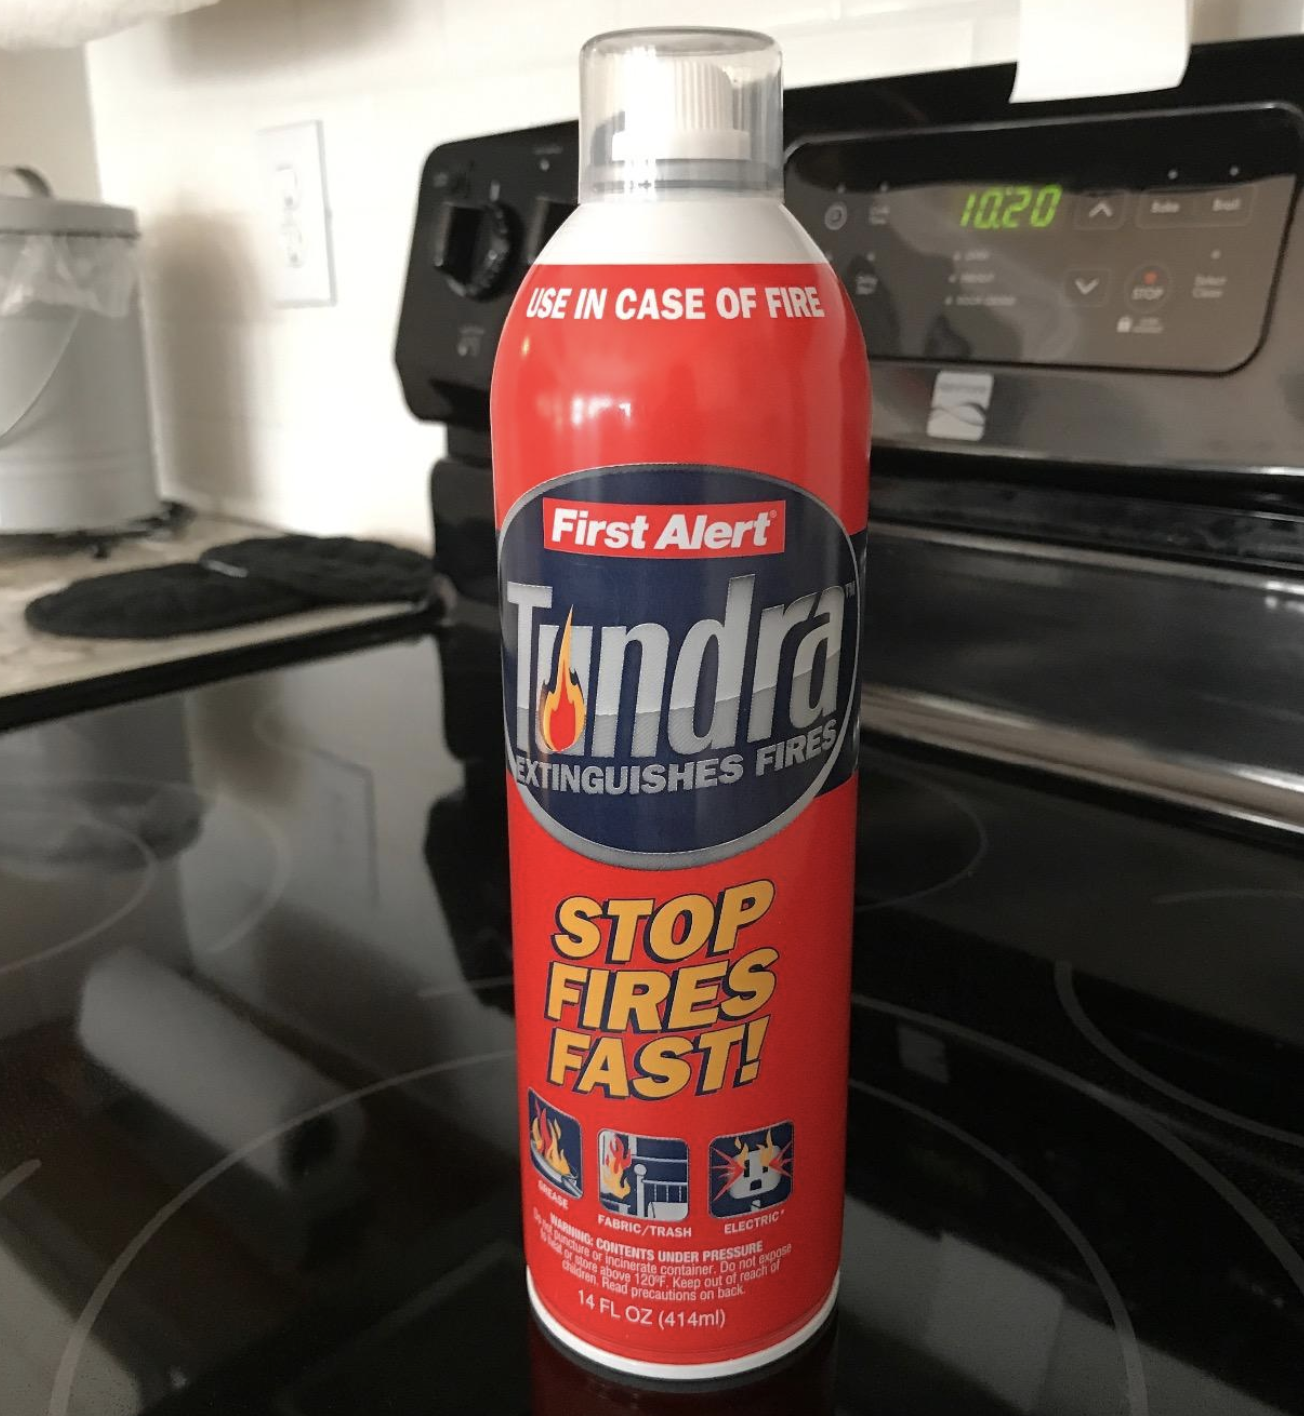 Reviewer image of a can of First Alert&#x27;s fire extinguisher sitting on top of a stove